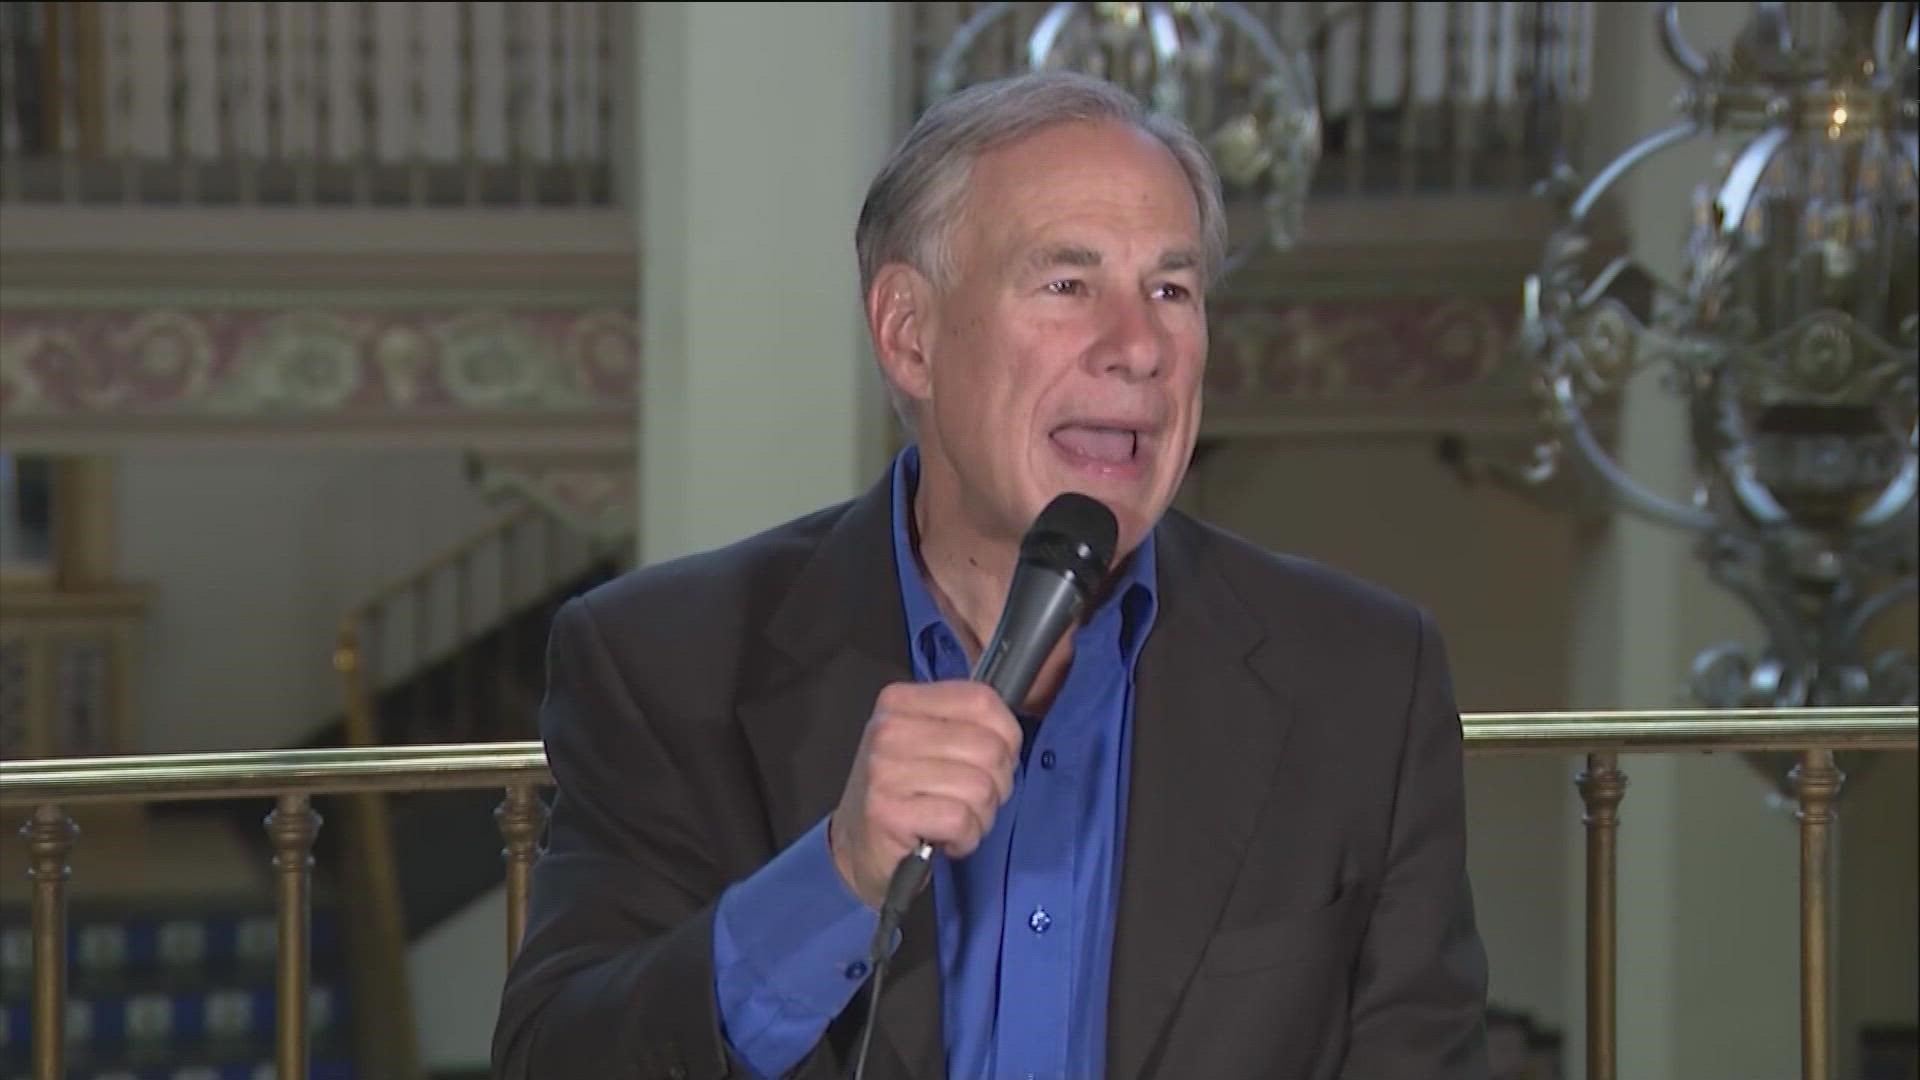 Gov. Abbott believes the fentanyl crisis is coming from President Biden's open border policy. KVUE's Natalie Haddad has more.